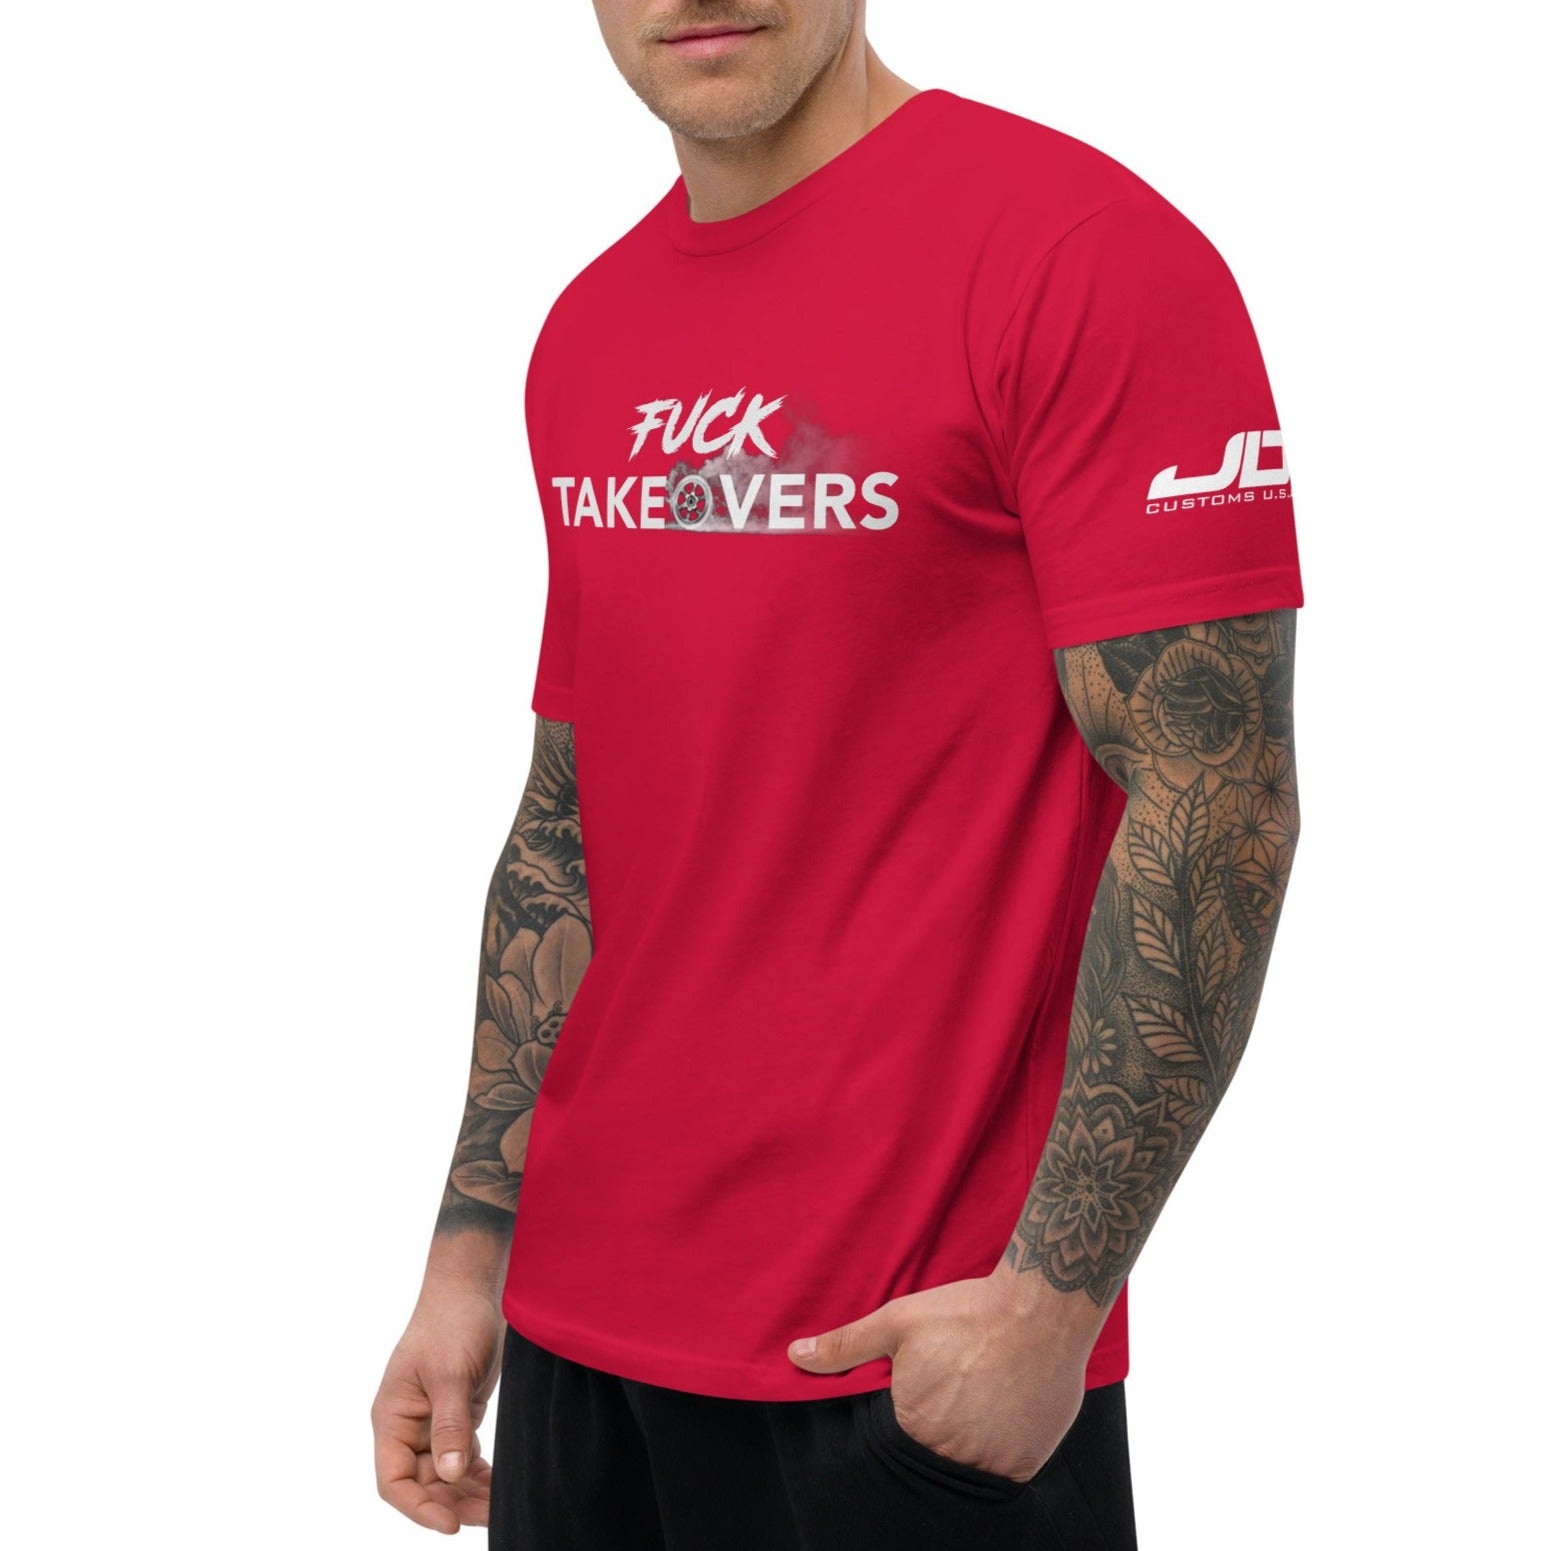 F*ck Takeovers Short Sleeve T-shirt